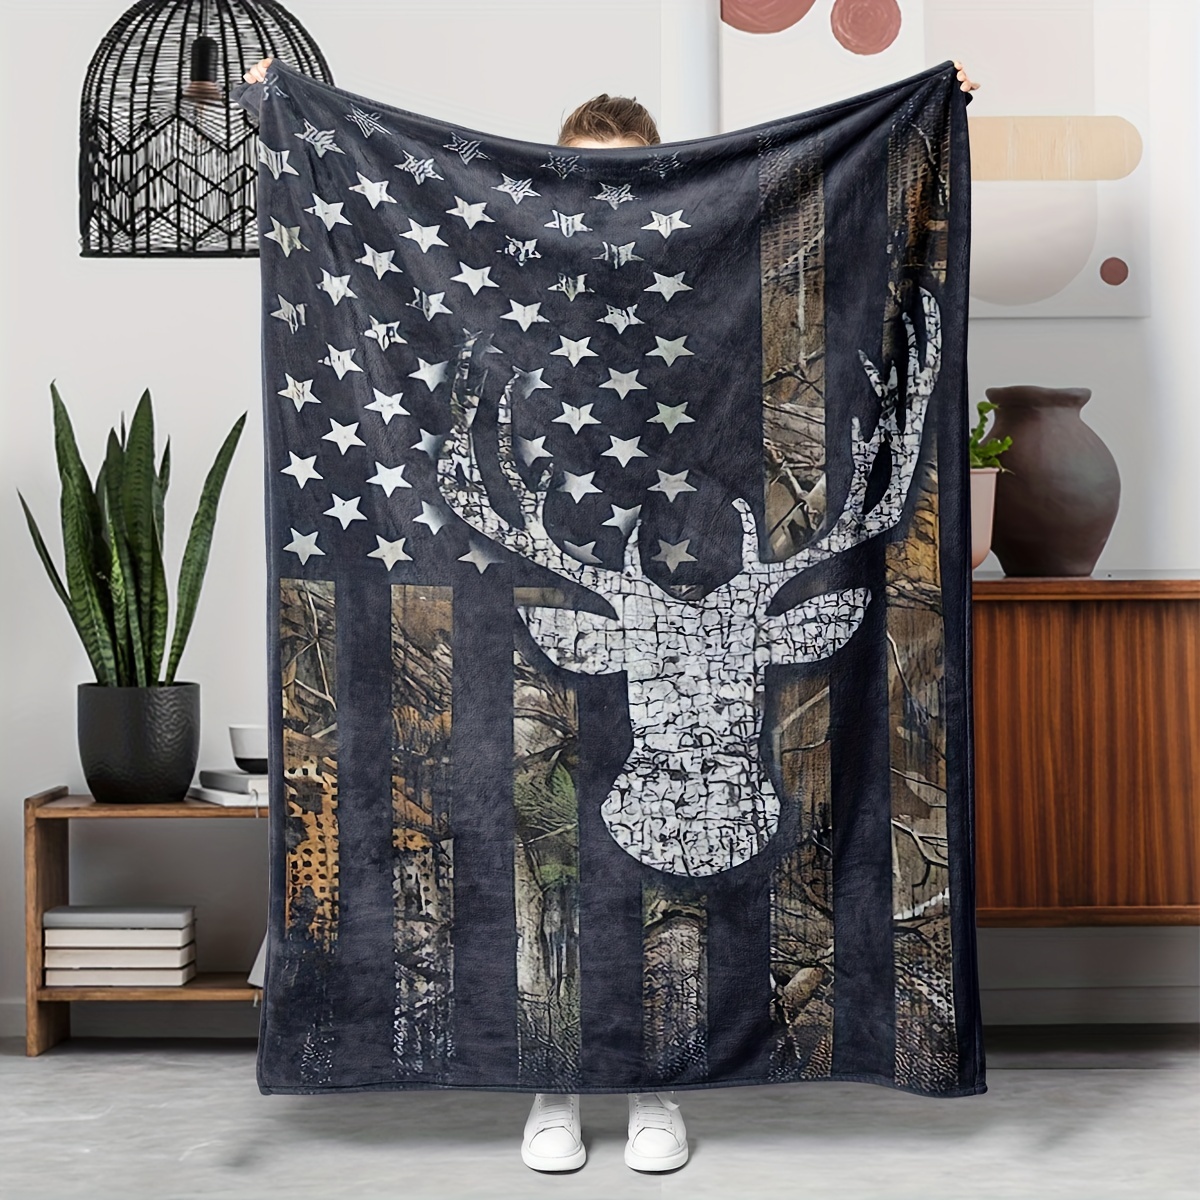 

1pc Flannel Blanket, American Flag Deer Head Pattern, Soft Warm And Comfortable Sofa Bed, Office Blanket, Christmas Halloween Gift, Small Blanket, Anp Blanket